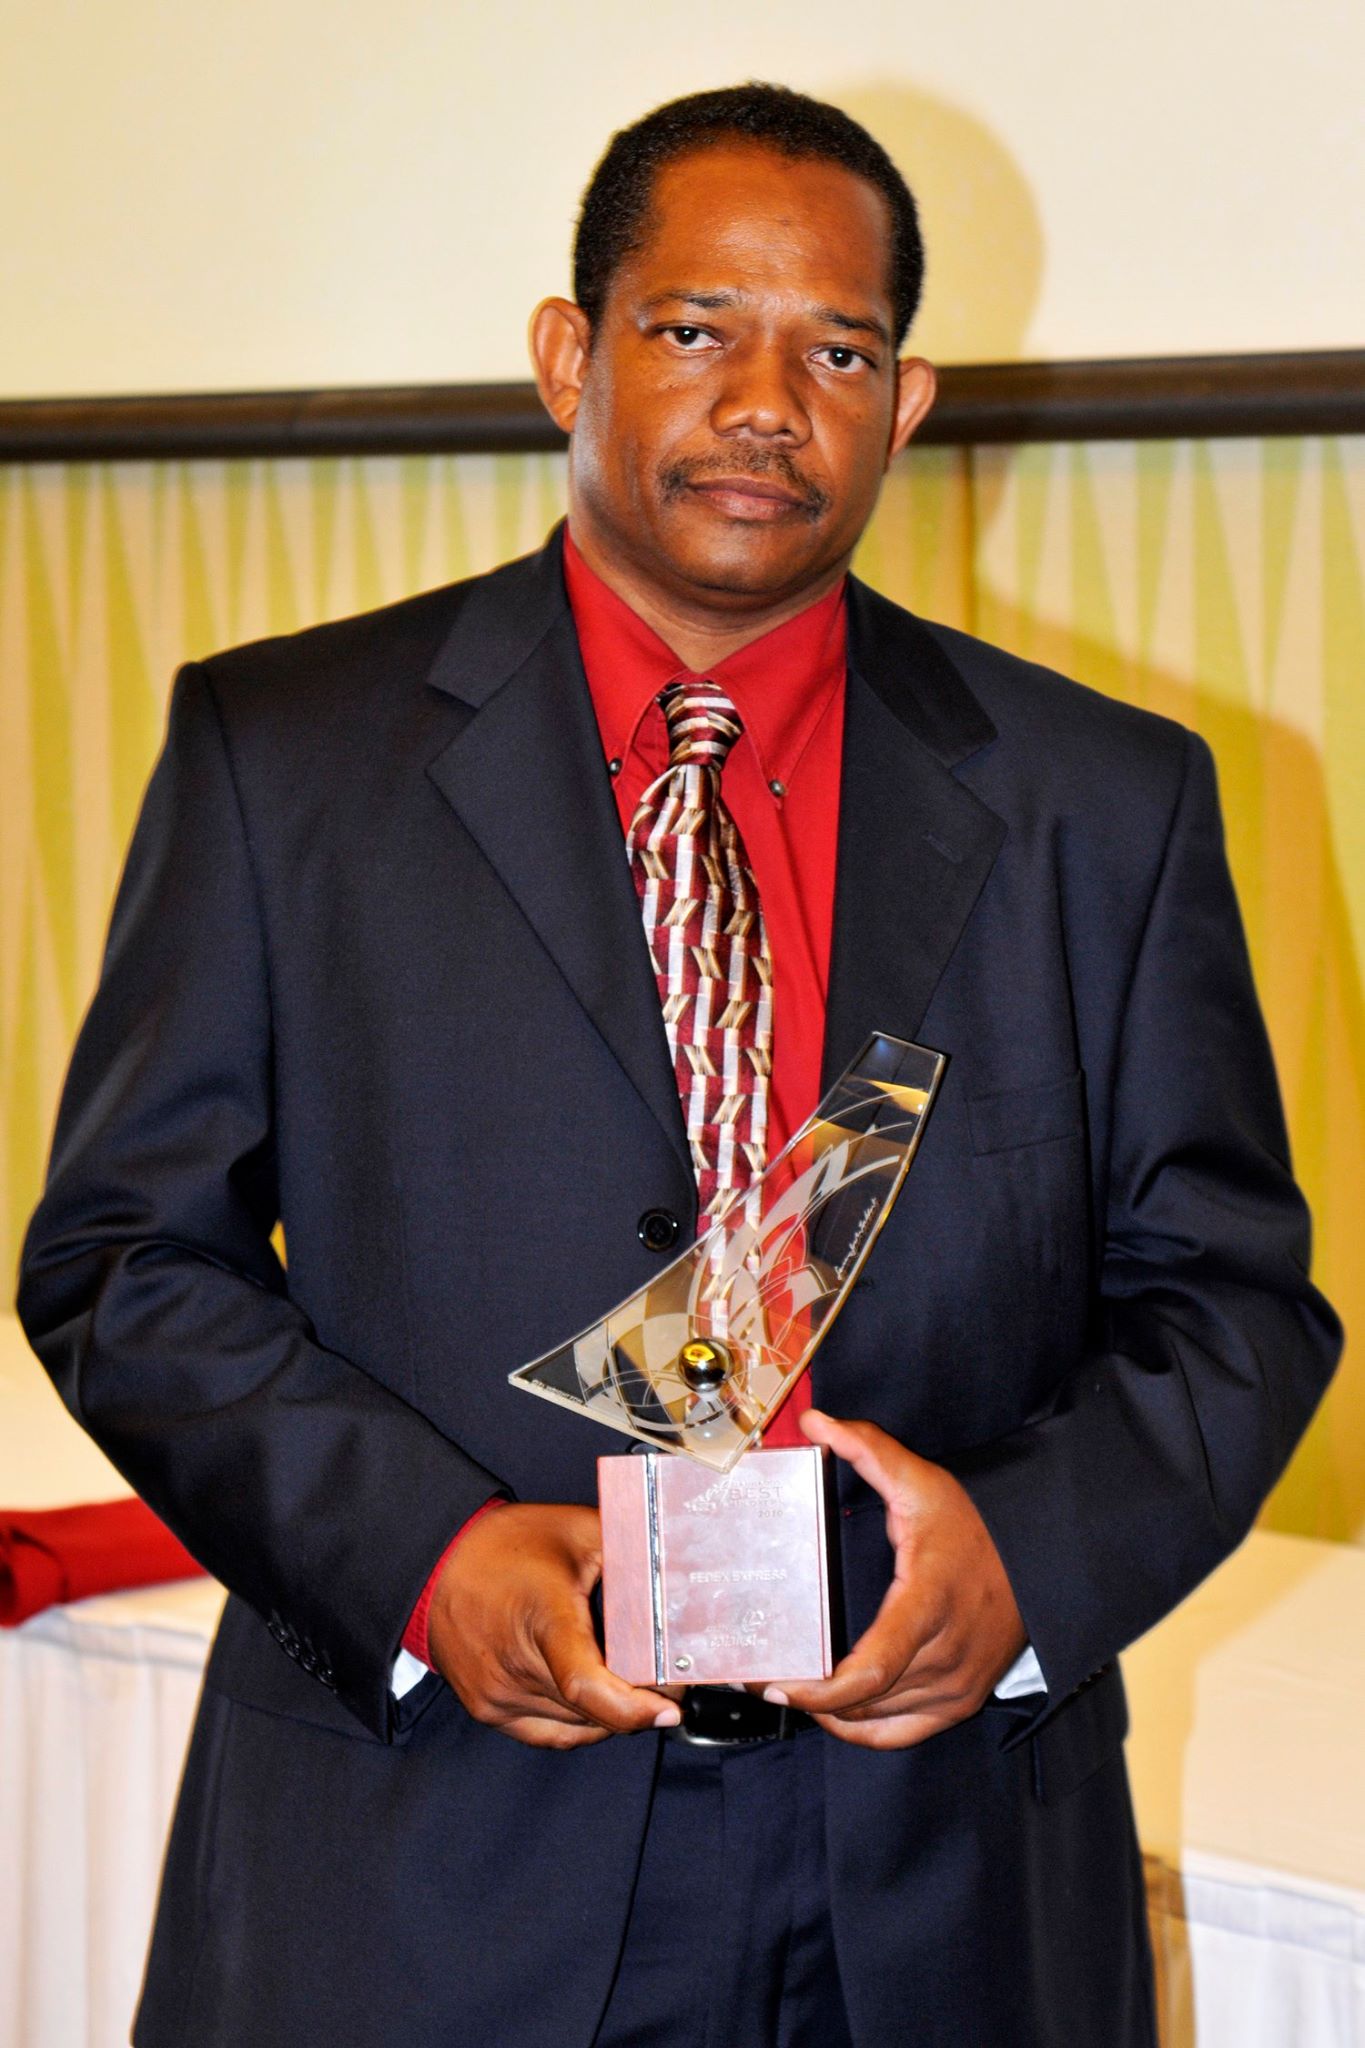 Winner of the Medium Business Category 2010 -Federal Express